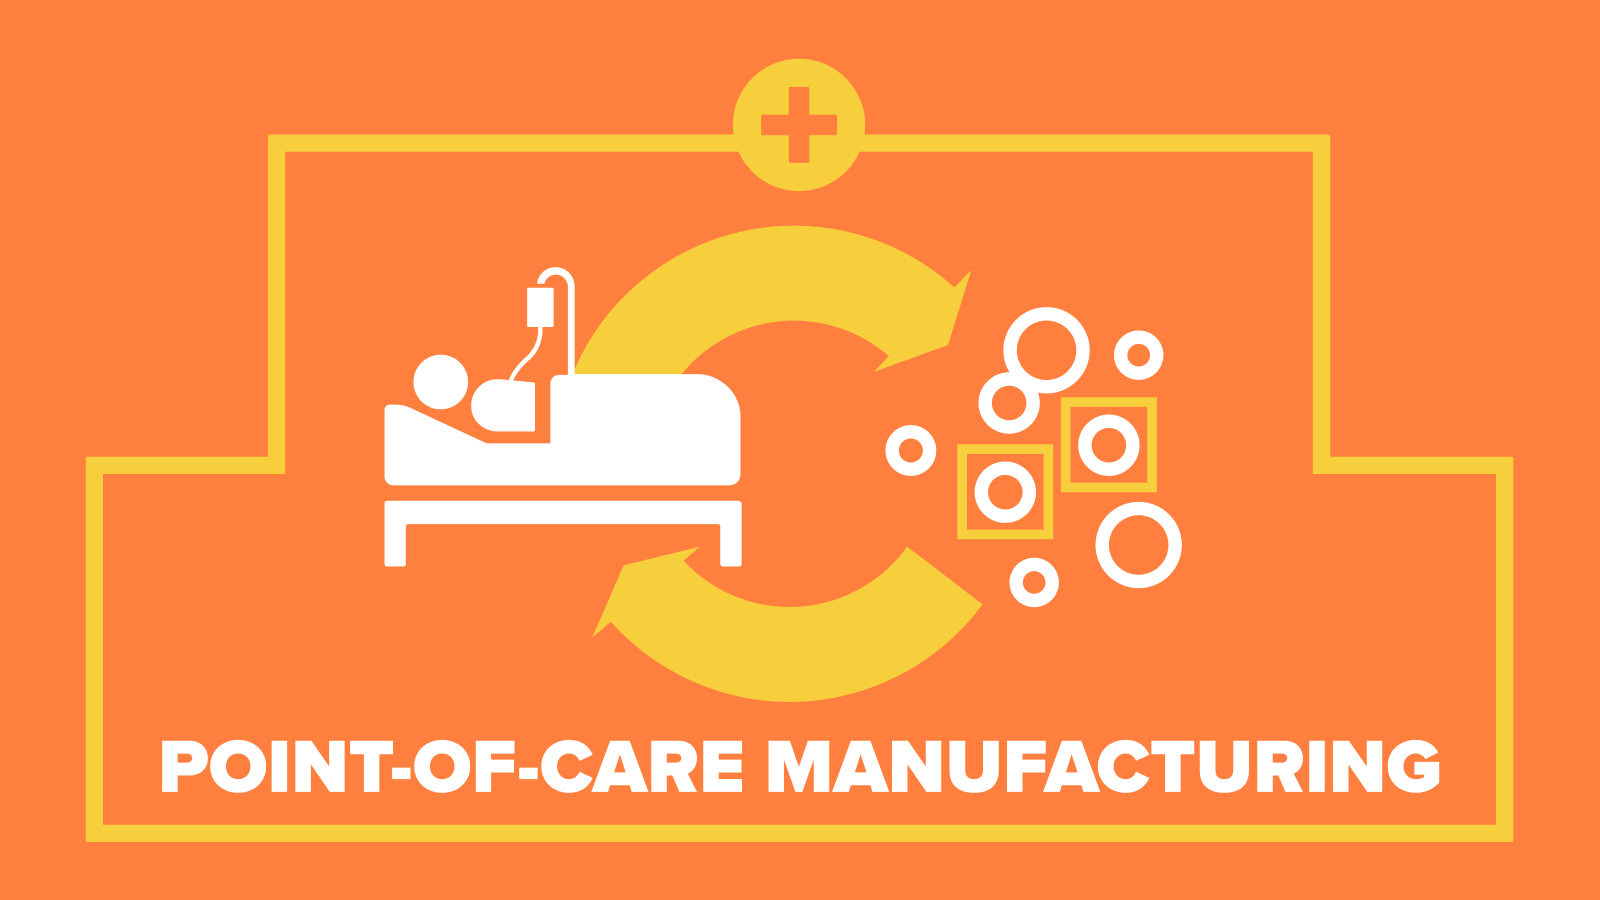 Point-of-care manufacturing for cell and gene therapies